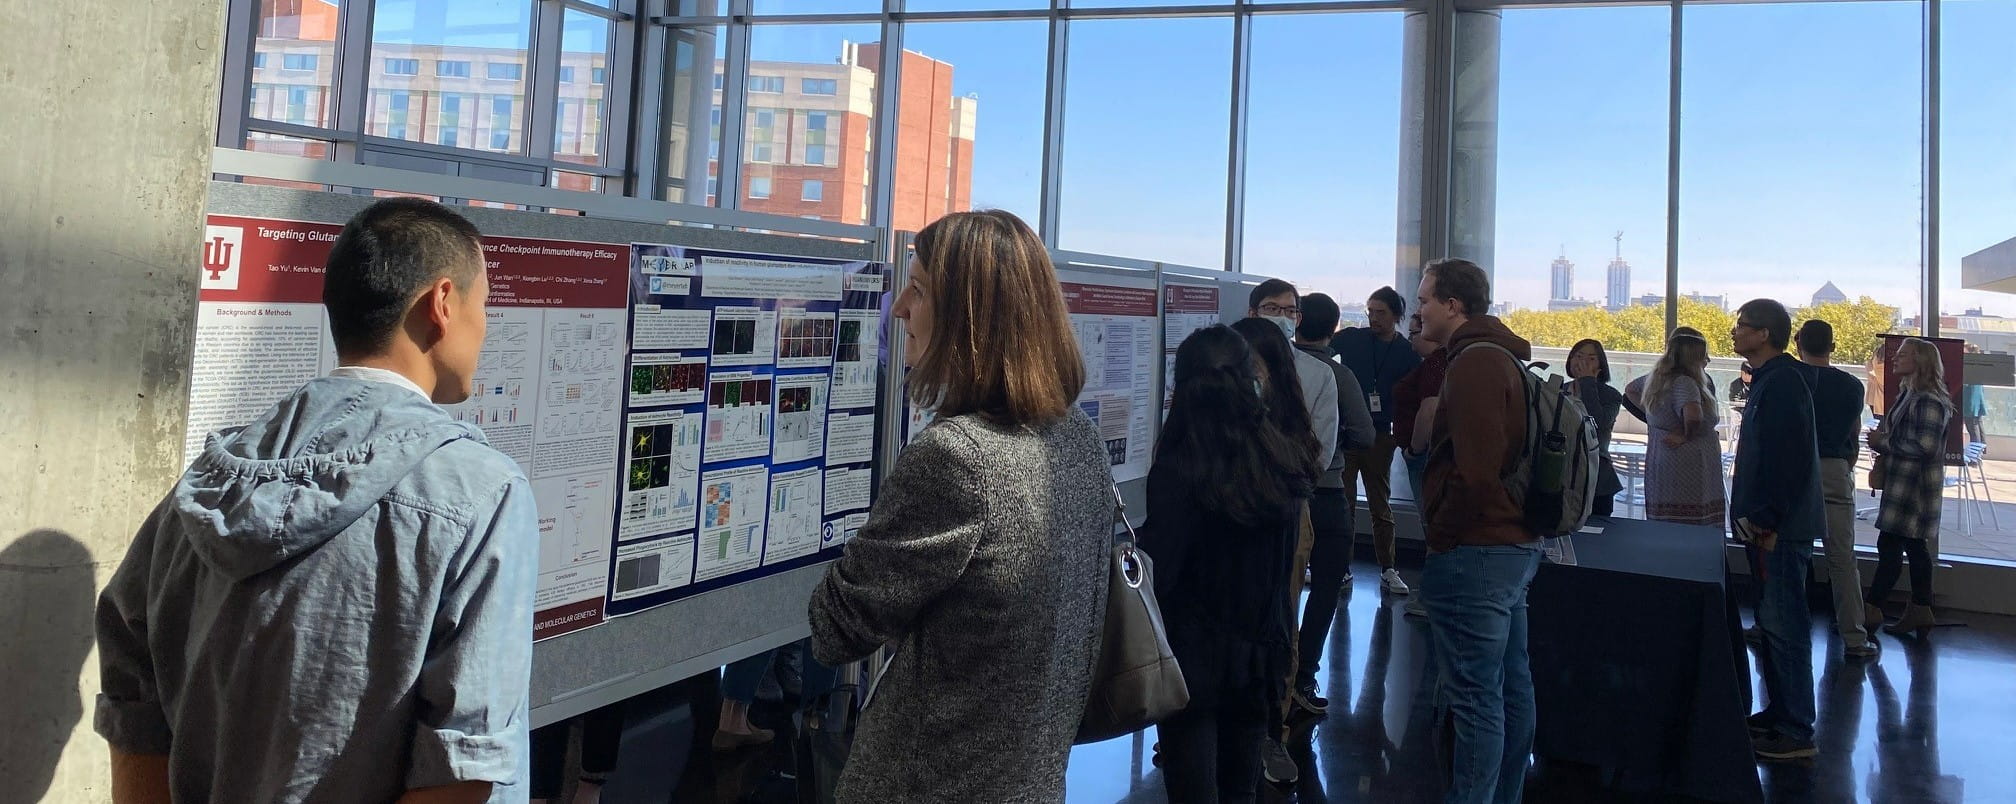 symposium attendees browse the poster session in front of a large window with the indy skyline in the background